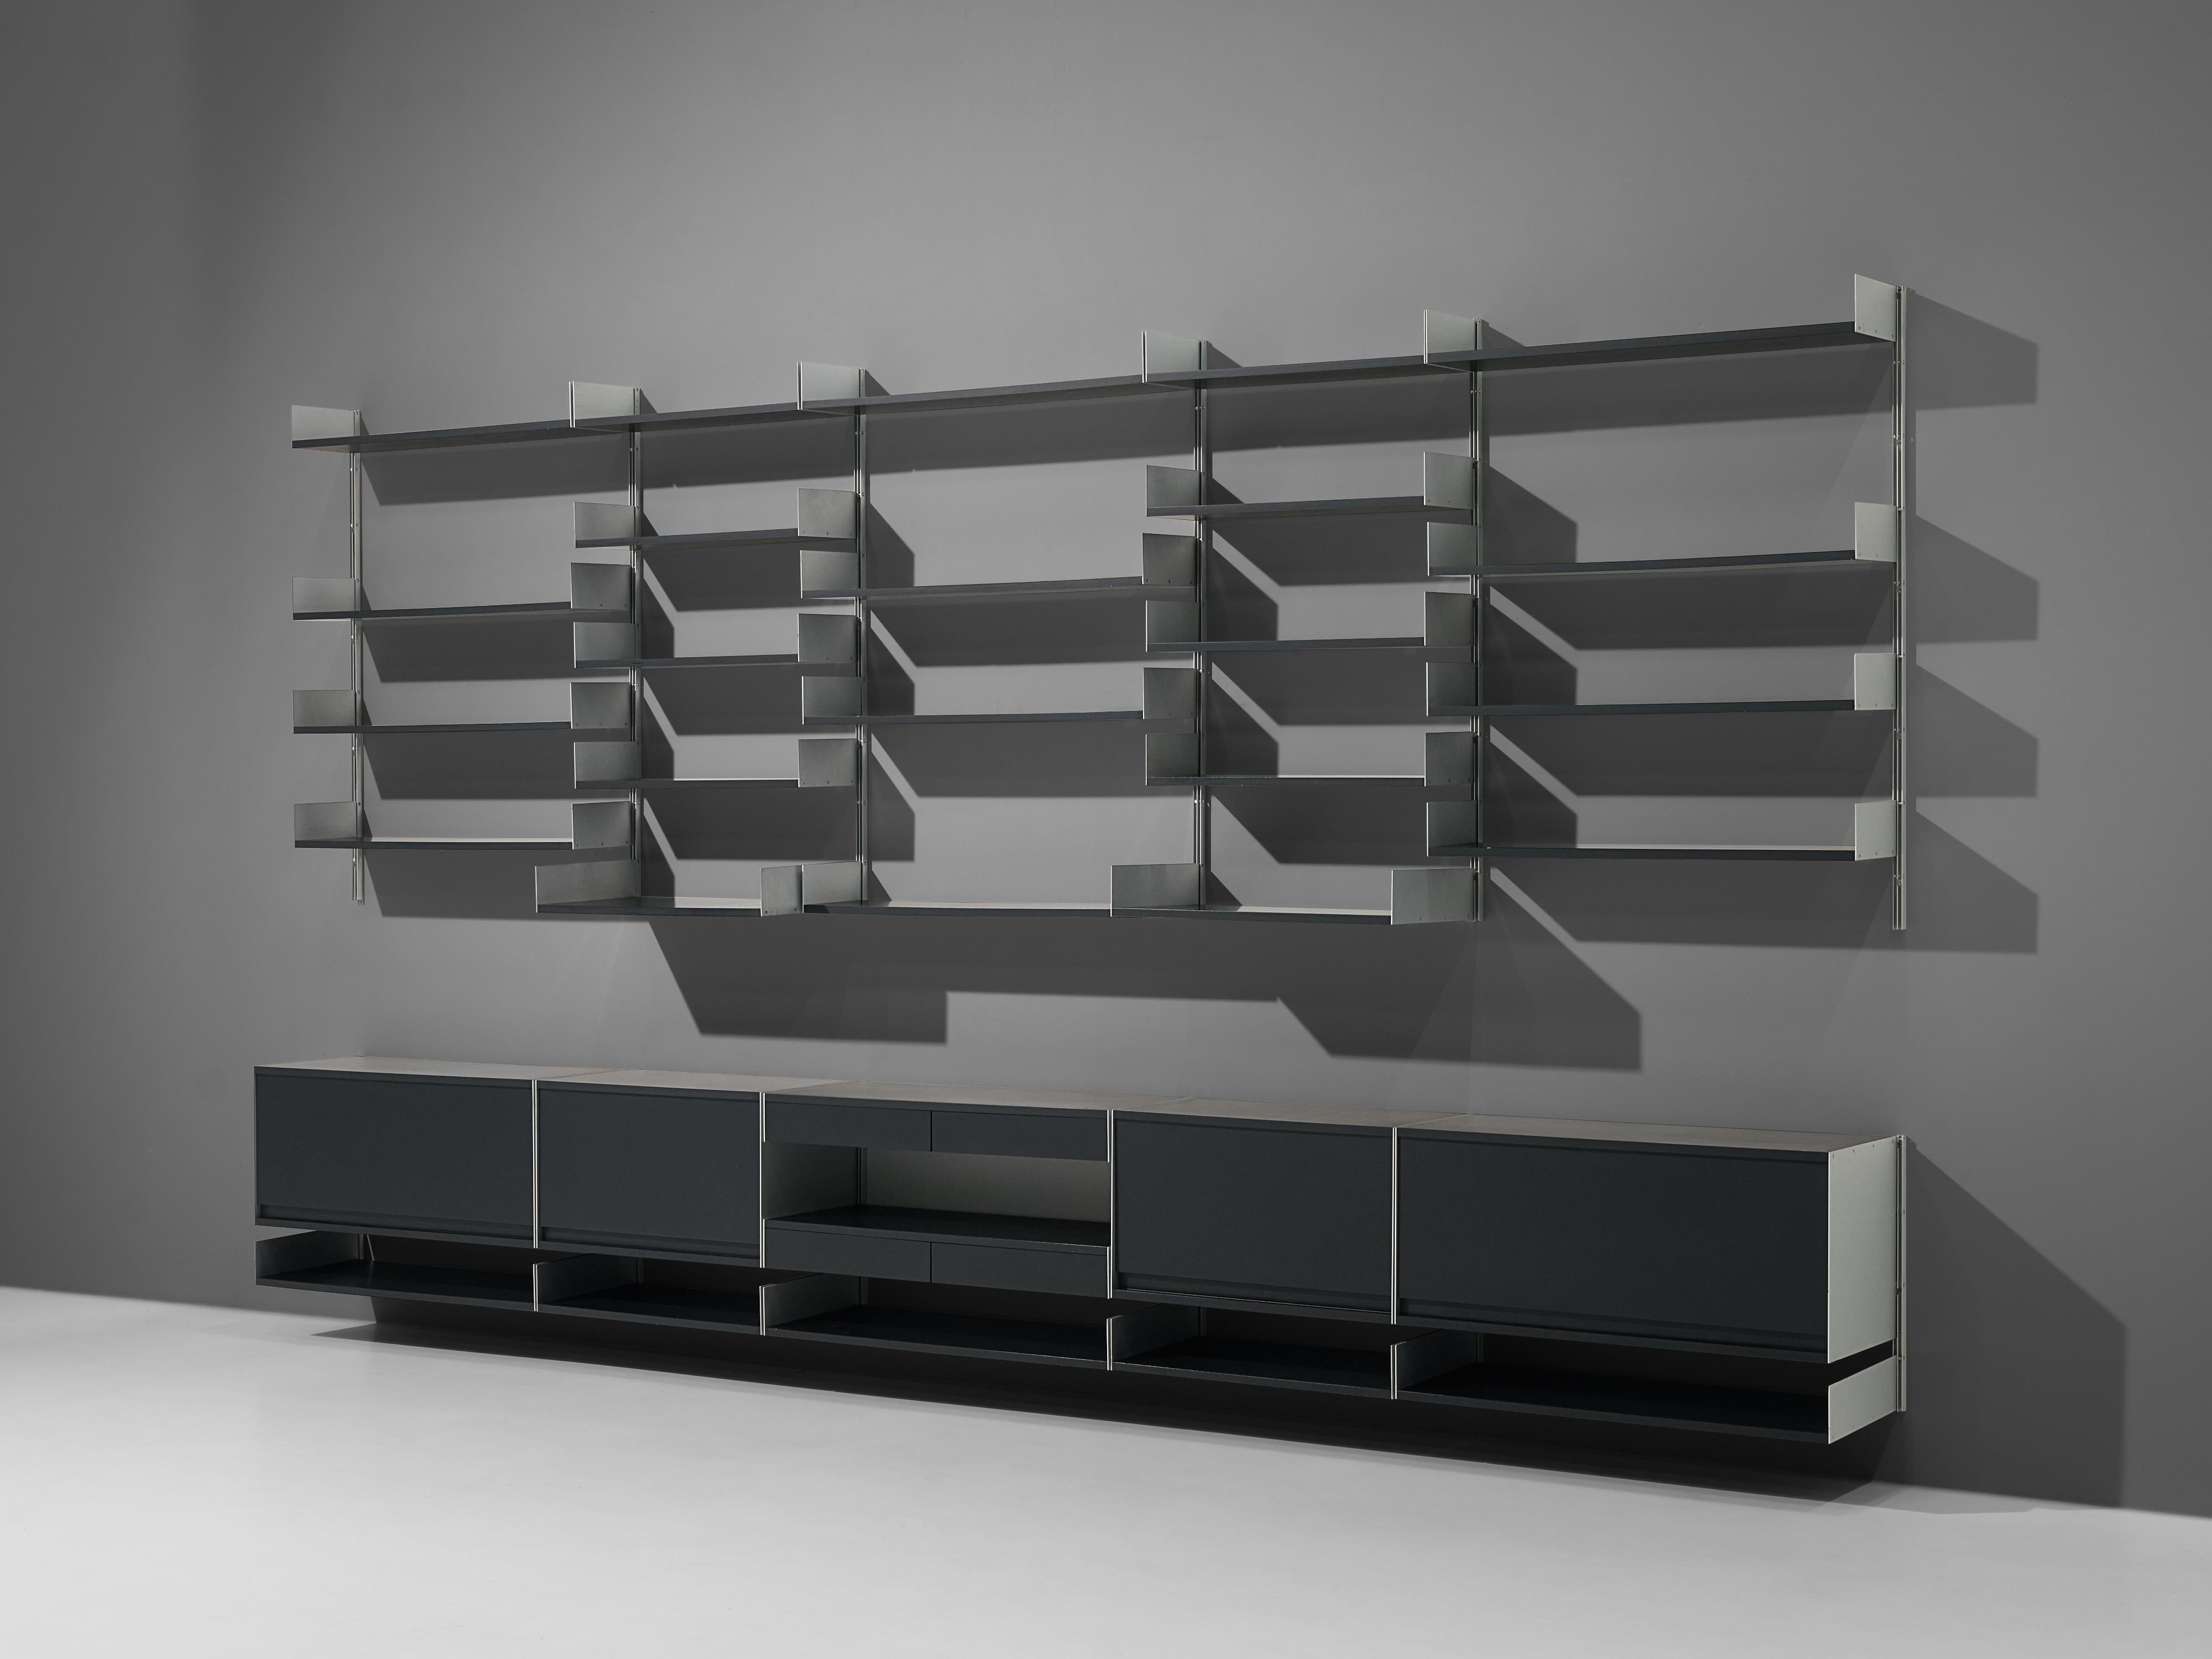 Dieter Rams, wall unit model 606, aluminum, wood, Germany, design 1960

Functional wall unit in aluminum and black colored wood by German product and furniture designer Dieter Rams. Shelves in two different length and widths and differently sized